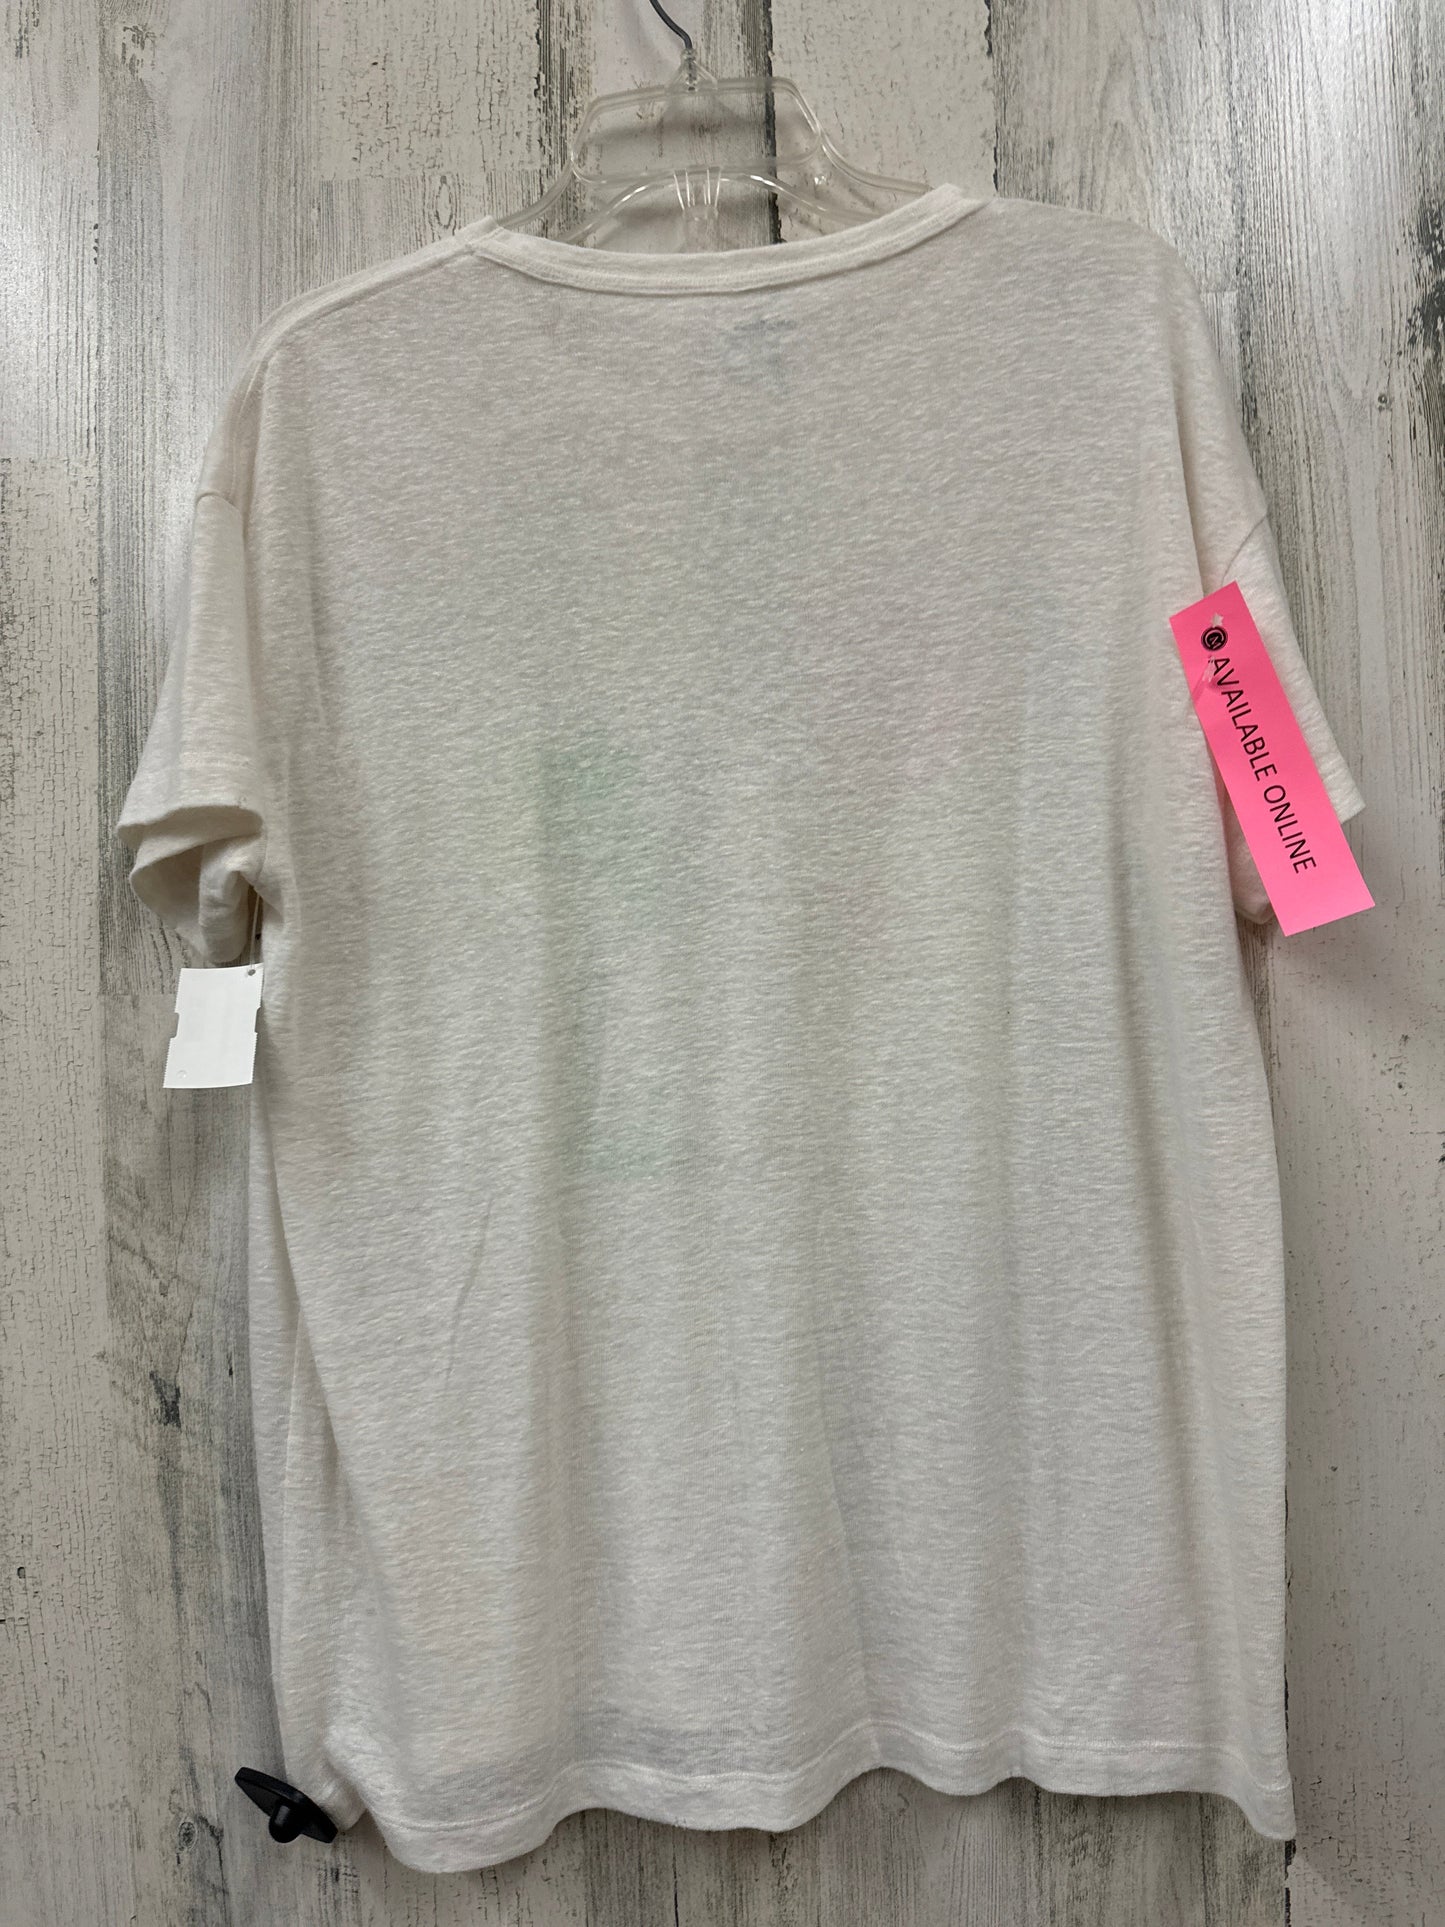 White Top Short Sleeve Aerie, Size S